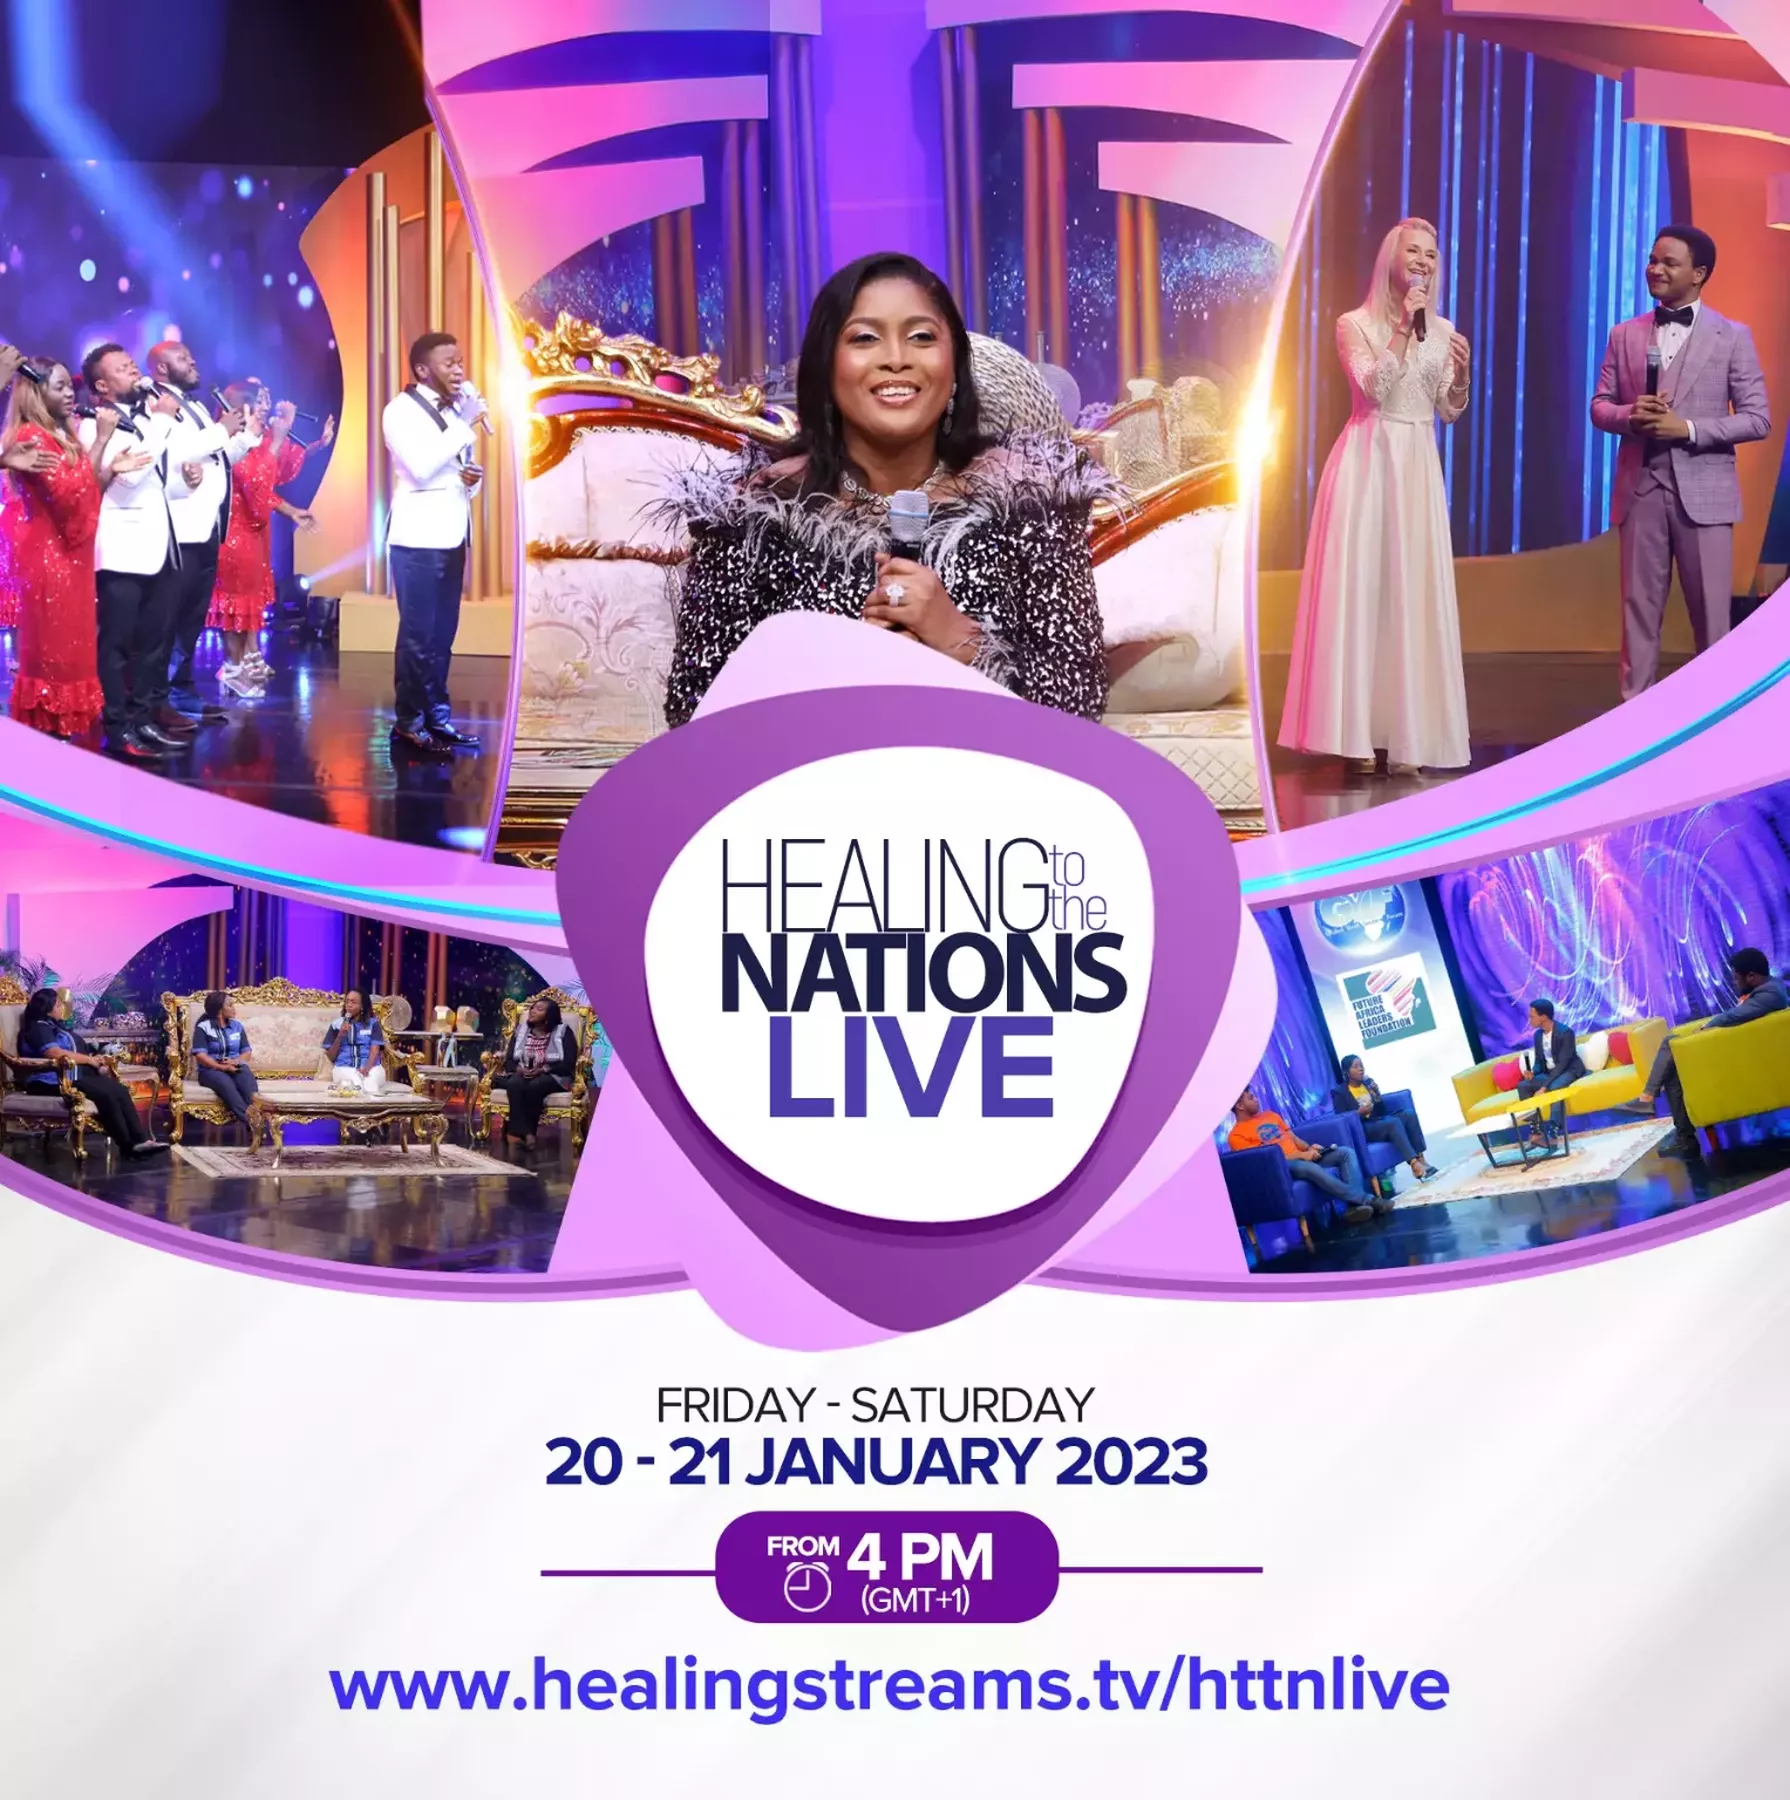 COMING YOUR WAY THIS MONTH: HEALING TO THE NATIONS LIVE